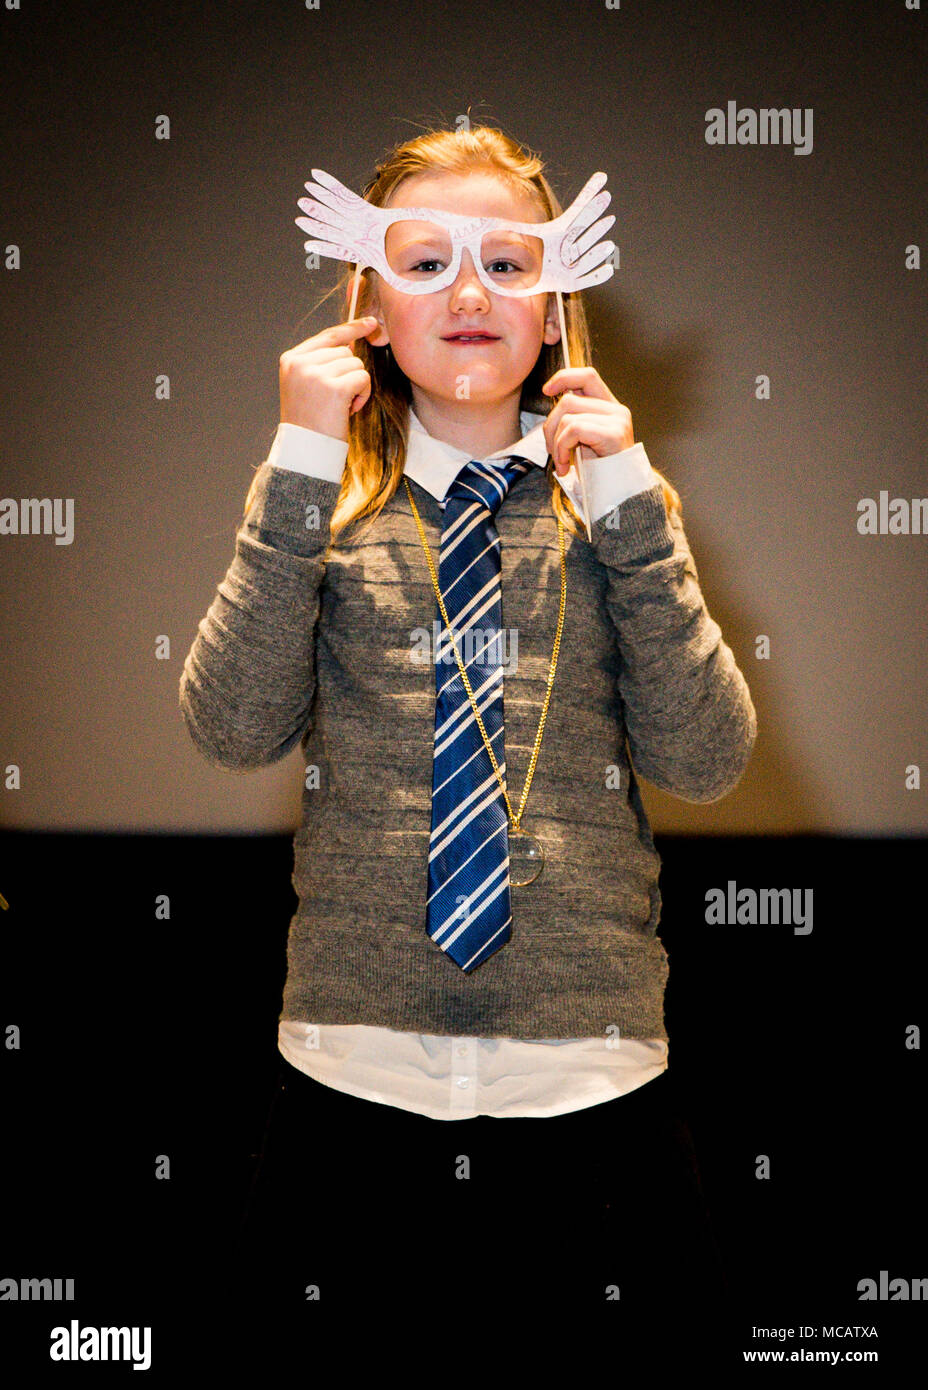 180206-F-MN500-008 SHAPE, Belgium (Feb. 06, 2018) A Luna Lovegood cosplayer poses during a costume contest at the inaugural Eight Nights of Harry Potter event at the SHAPE Cinema Alliance Auditorium. The United States Army Garrison Benelux Army Community Service partnered with American Forces Network Benelux and SHAPE Morale and Welfare Branch to organize a multi-week Harry Potter themed marathon to boost morale, present family resources to the audience, and use a popular story to bring the SHAPE NATO community together. (U.S. Air Force photo by Broadcast Journalist Senior Airman Brycen Guerre Stock Photo